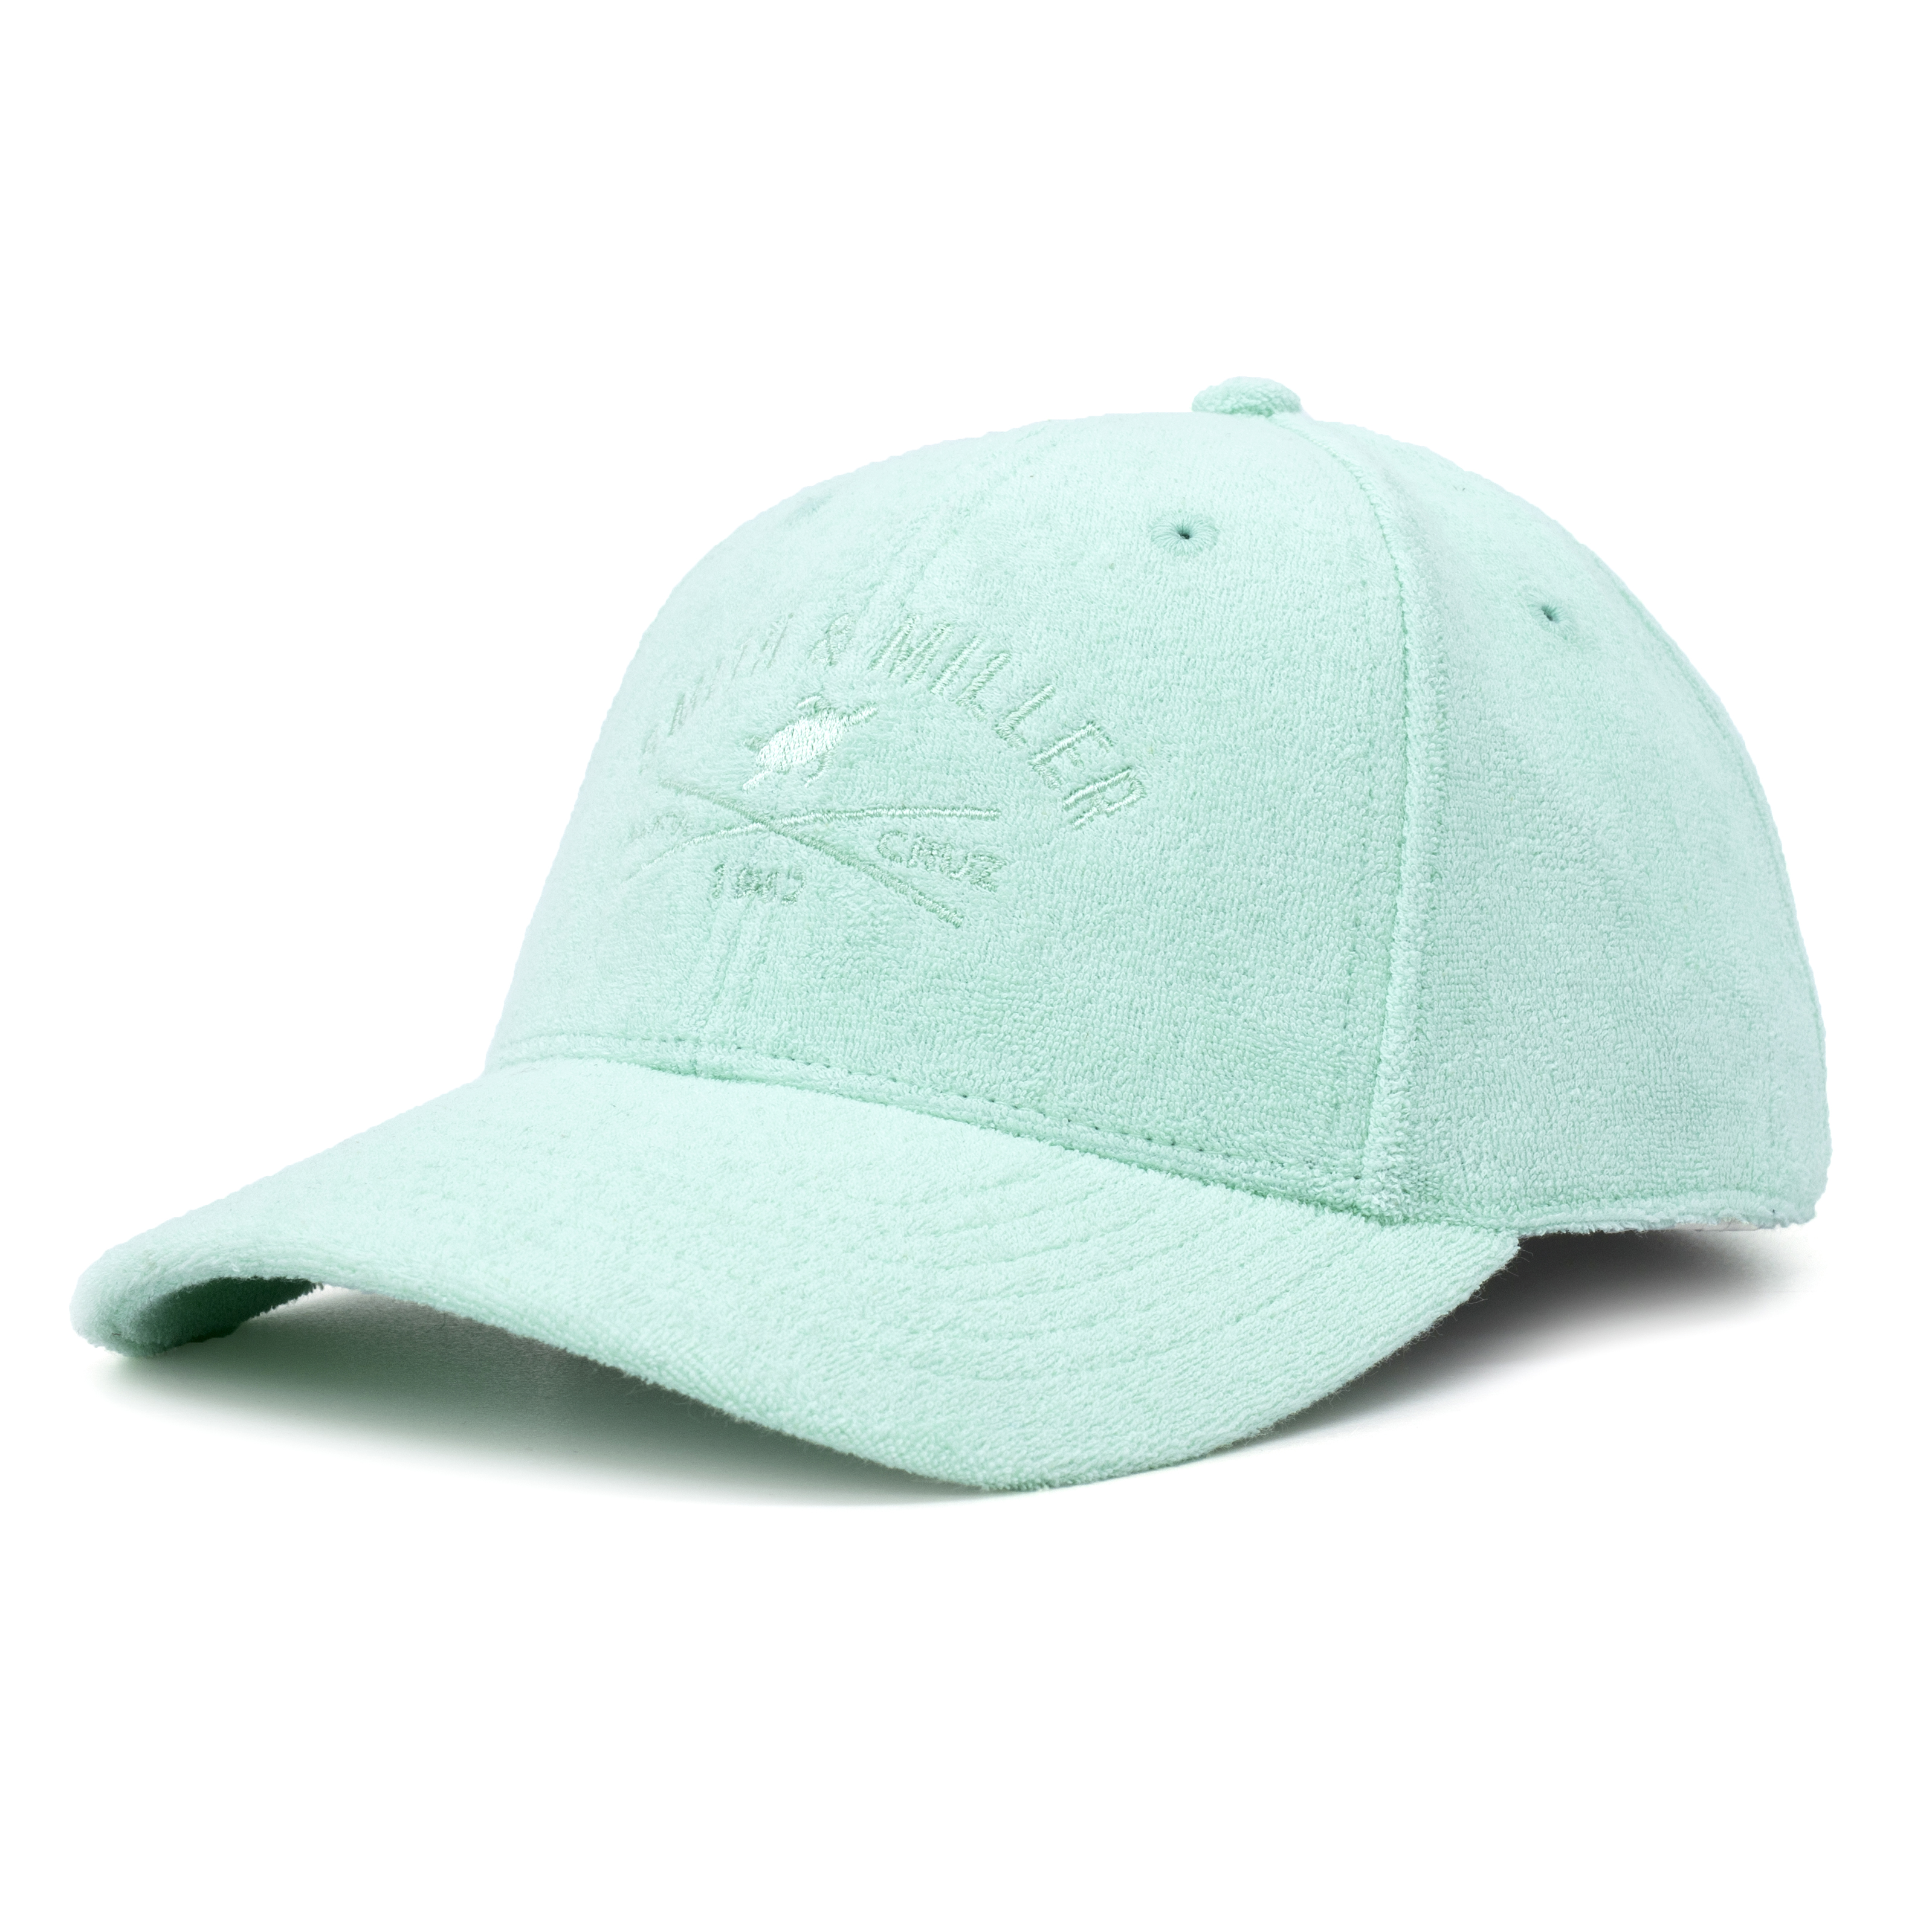 Smith & Miller Likely Women Curved Cap, mint